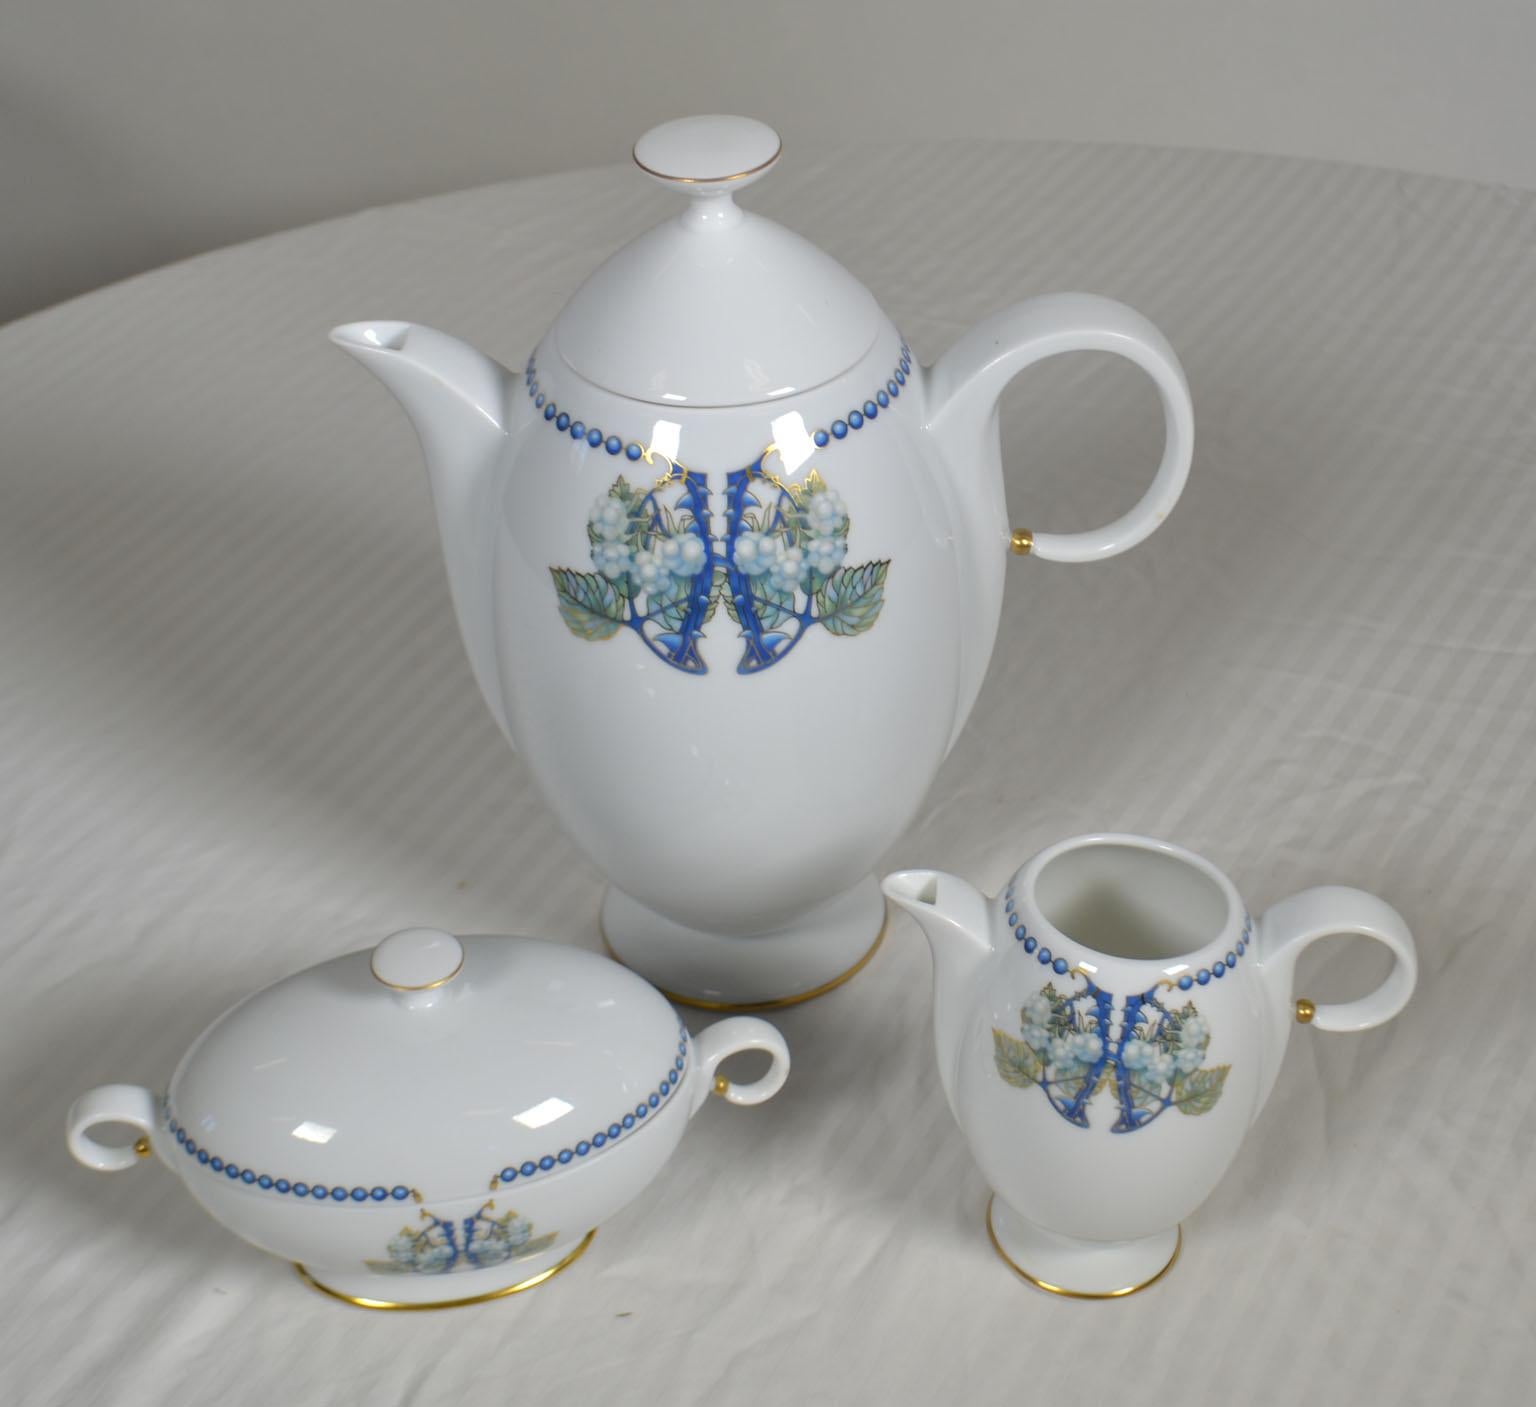 3-piece white, blue and multicolored Limoges porcelain Lalique Mûres Blackberry coffee set with beaded motif at rims, gilt accents throughout and brand stamp at undersides. Includes 1 coffee pot, 1 creamer and 1 sugar bowl. Made in France.